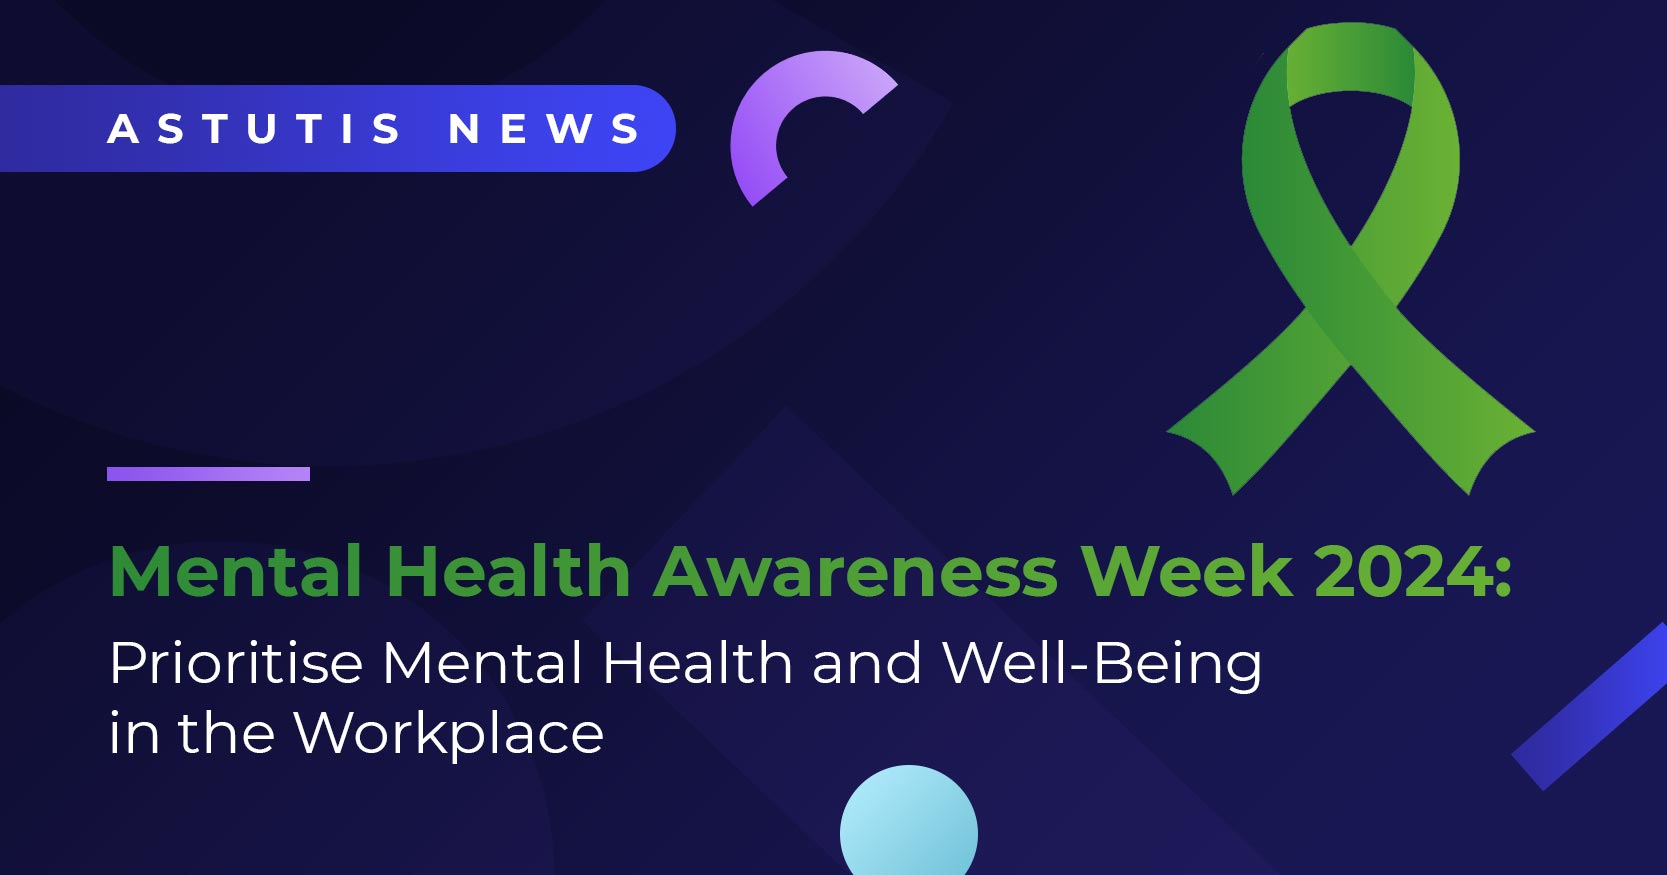 Prioritise Mental Health and Wellbeing in the Workplace: Mental Health Awareness Week 2024